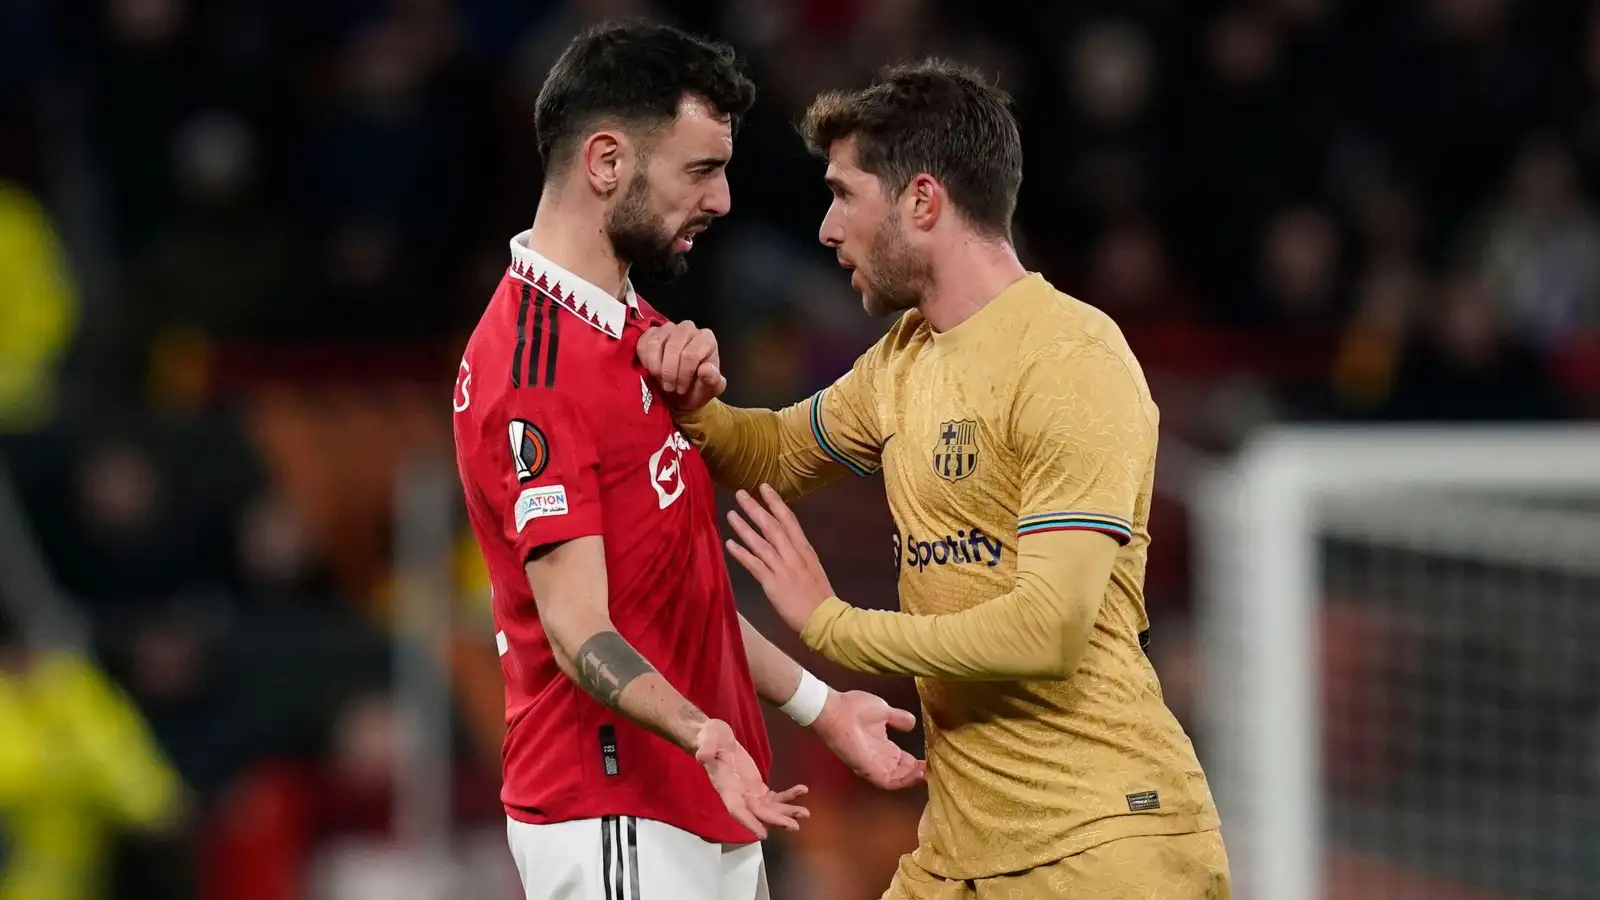 Bruno Fernandes booting the ball at De Jong was pure catharsis for Utd